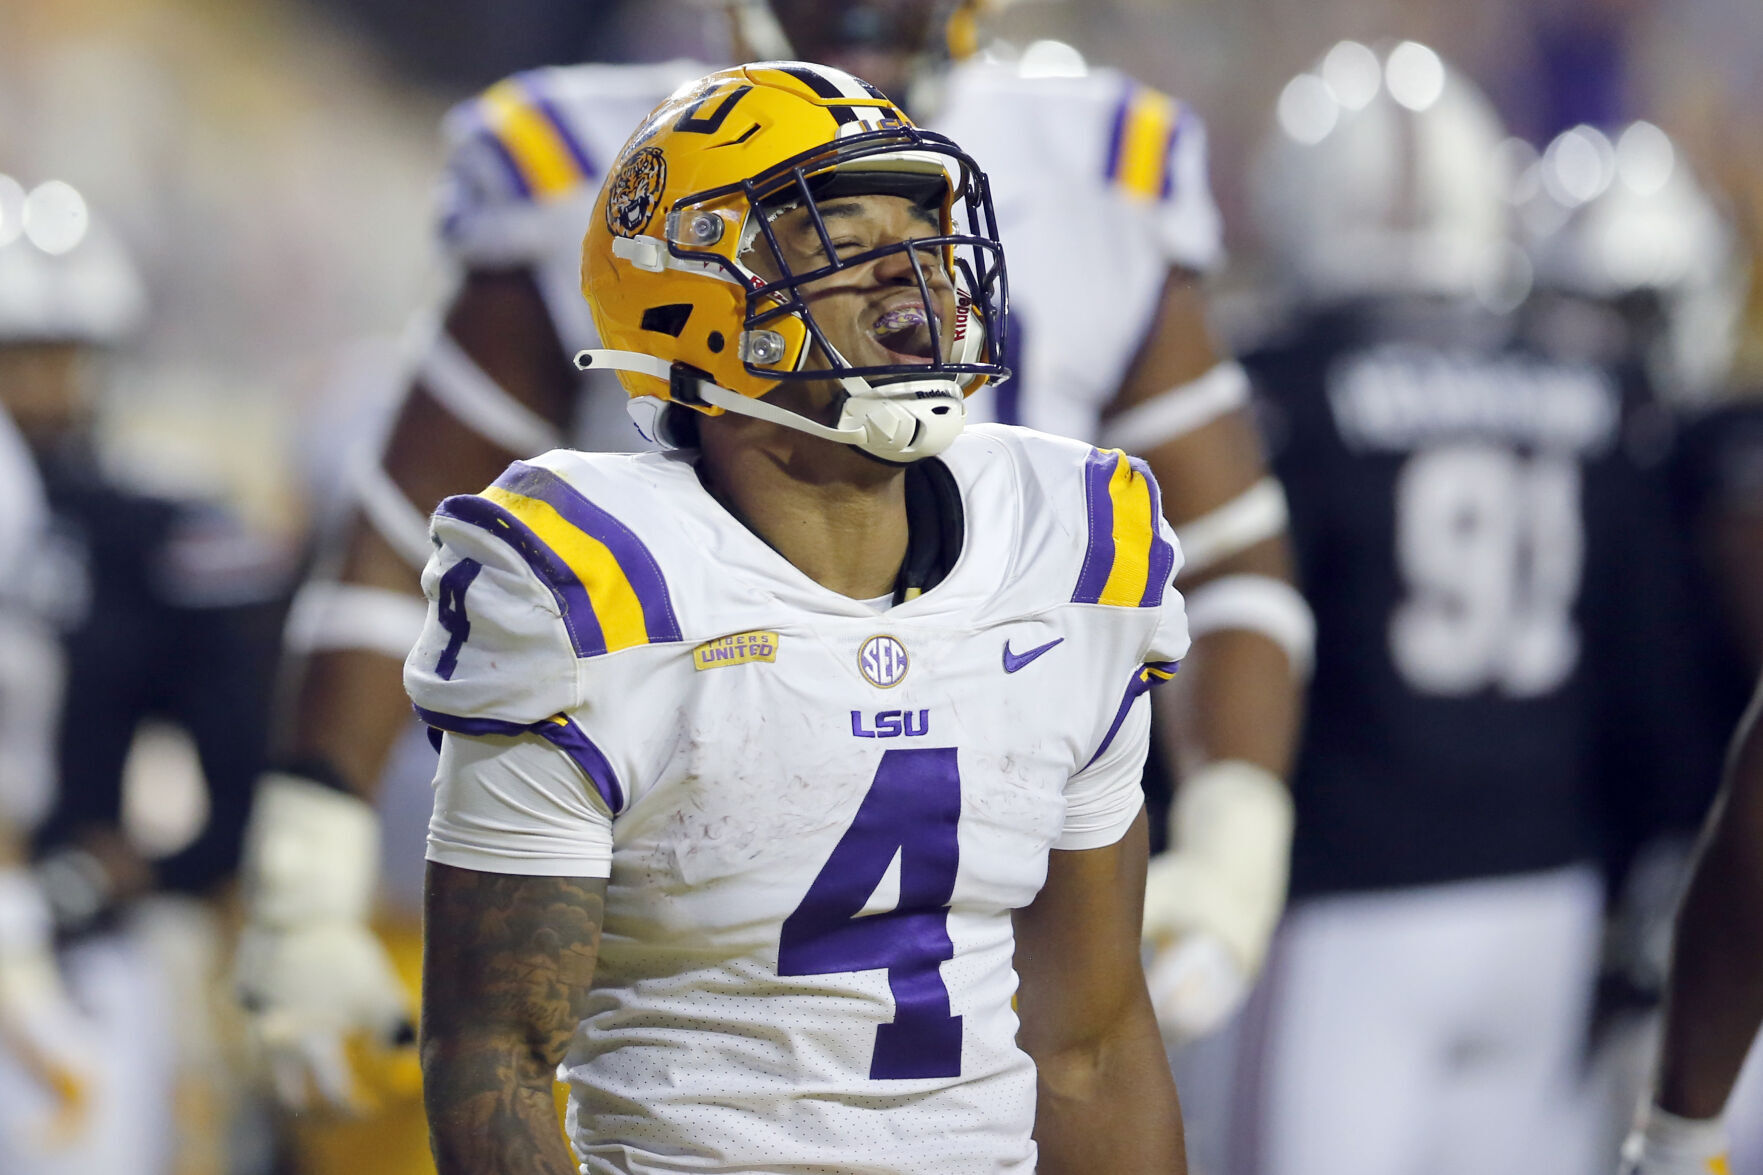 2022 LSU Tigers football schedule, game times, TV, homecoming date, results